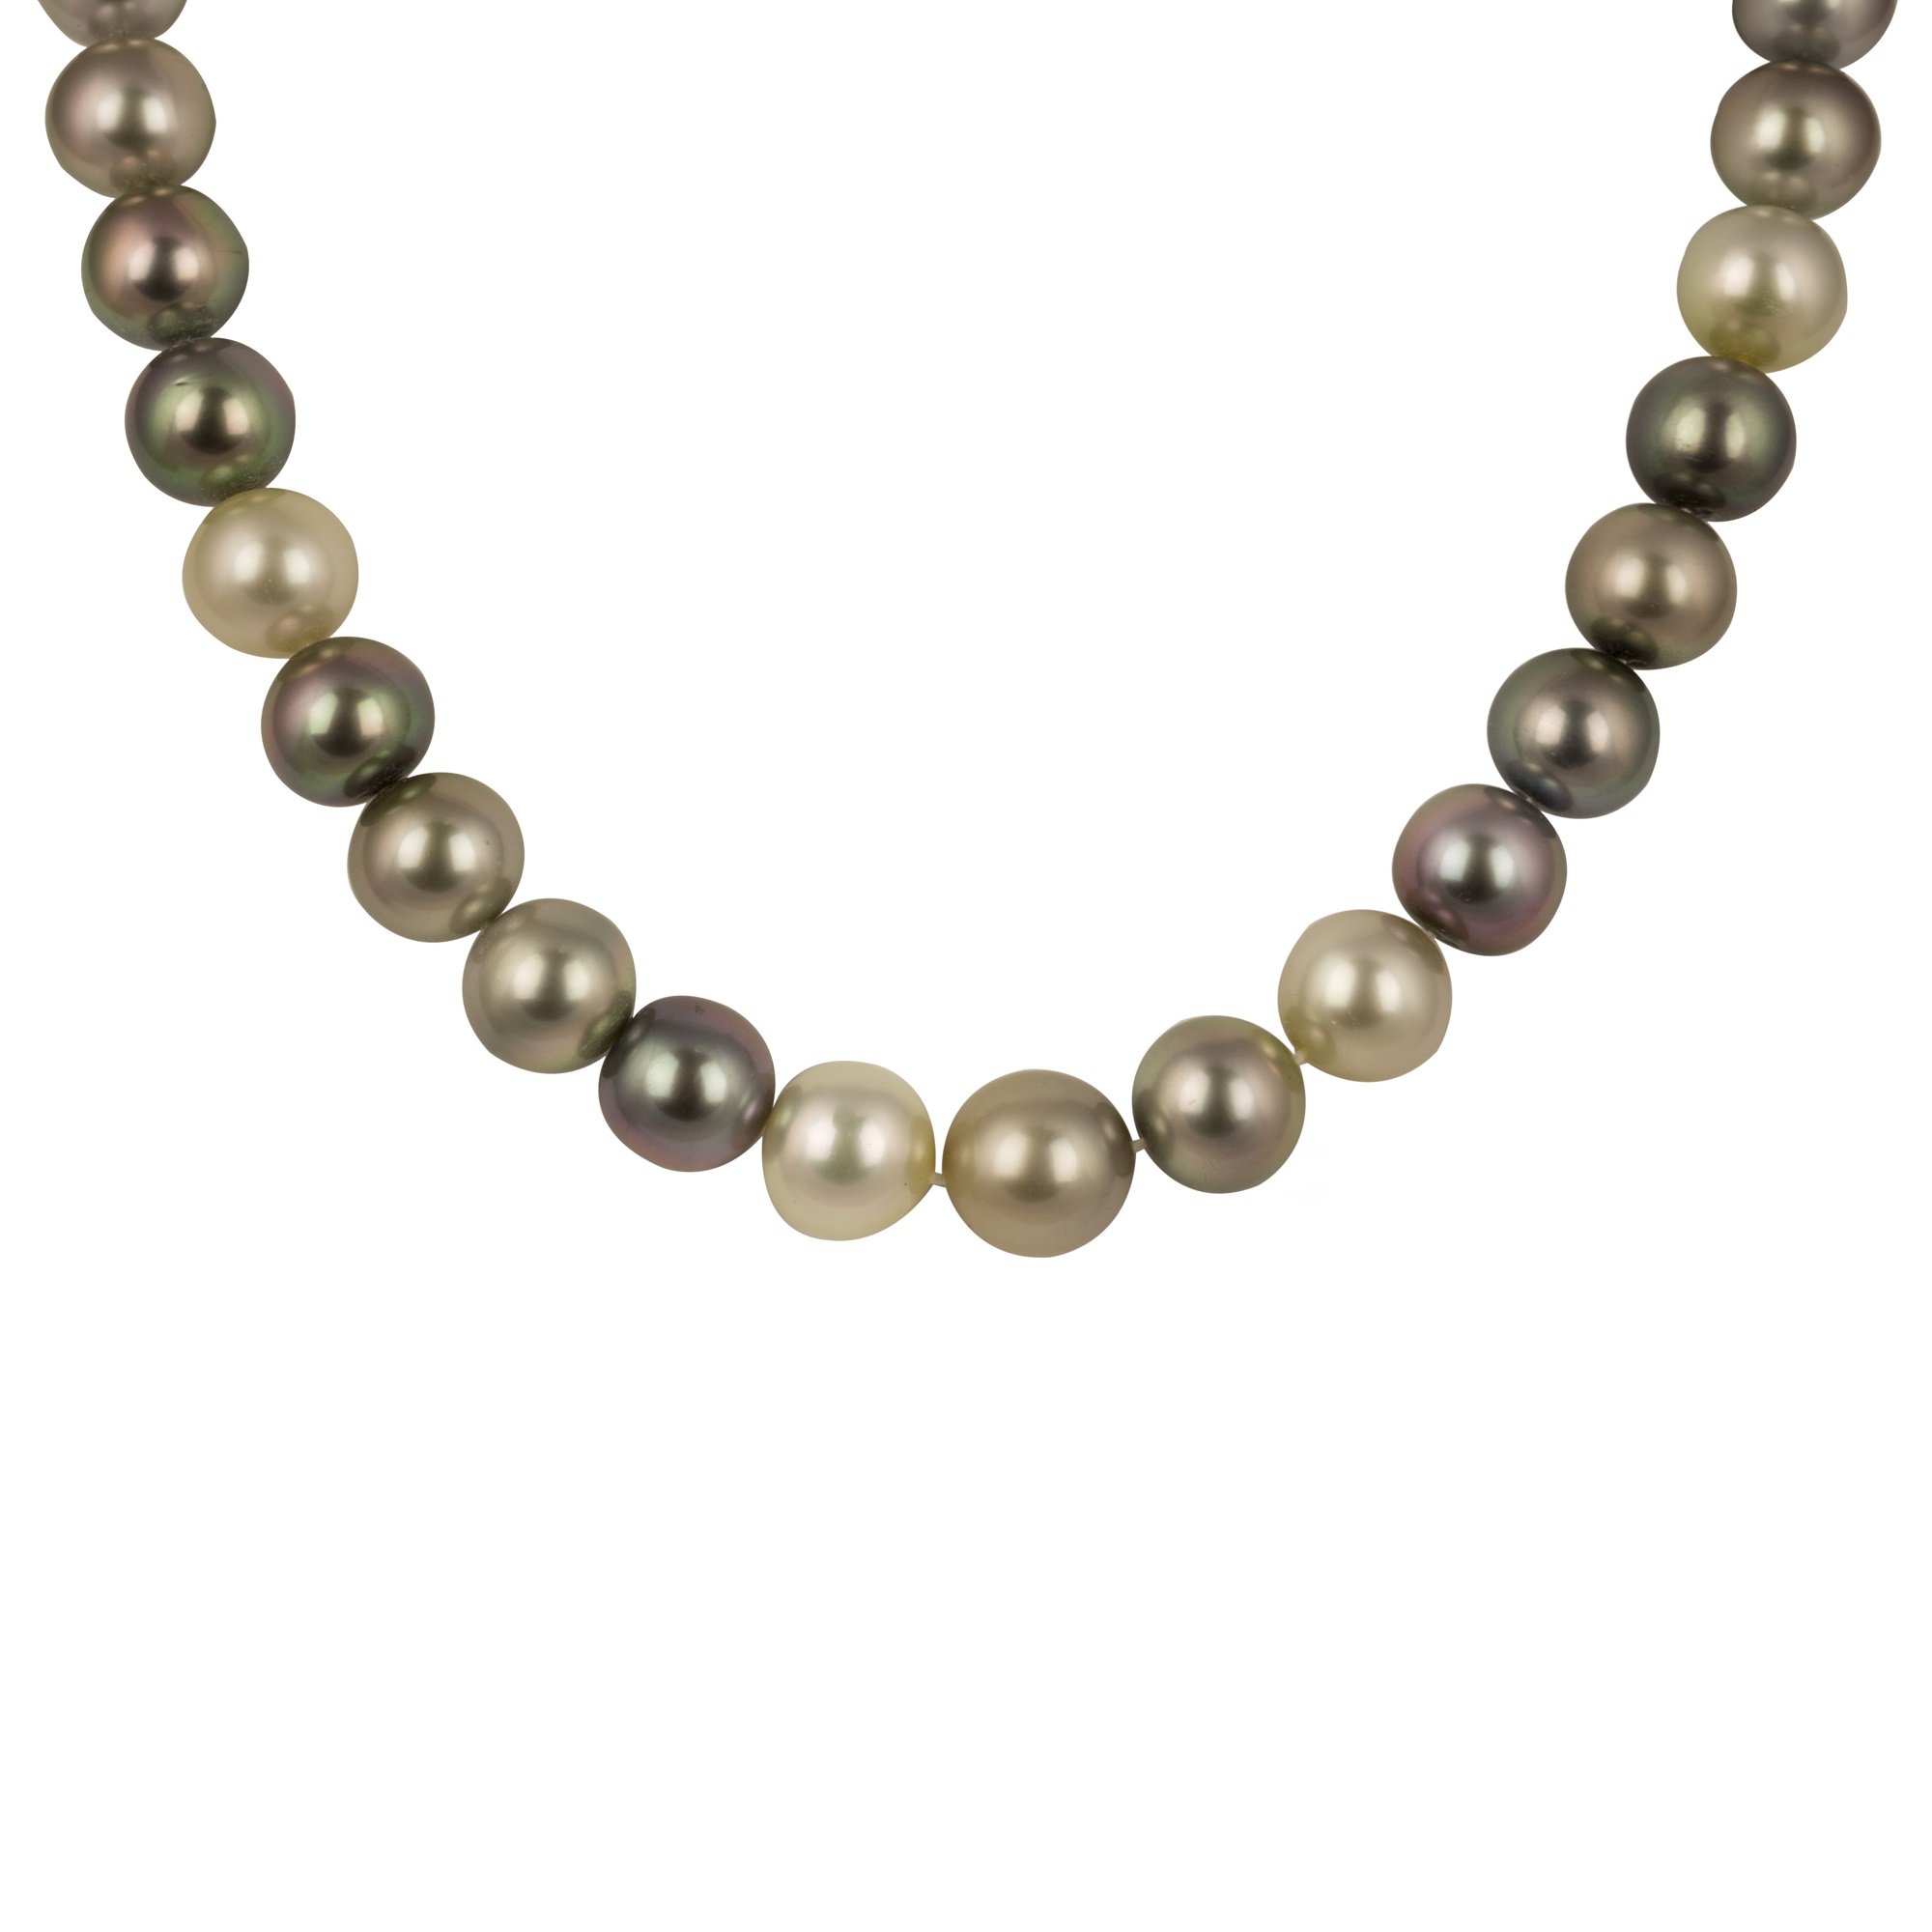 A Tahitian pearl necklace